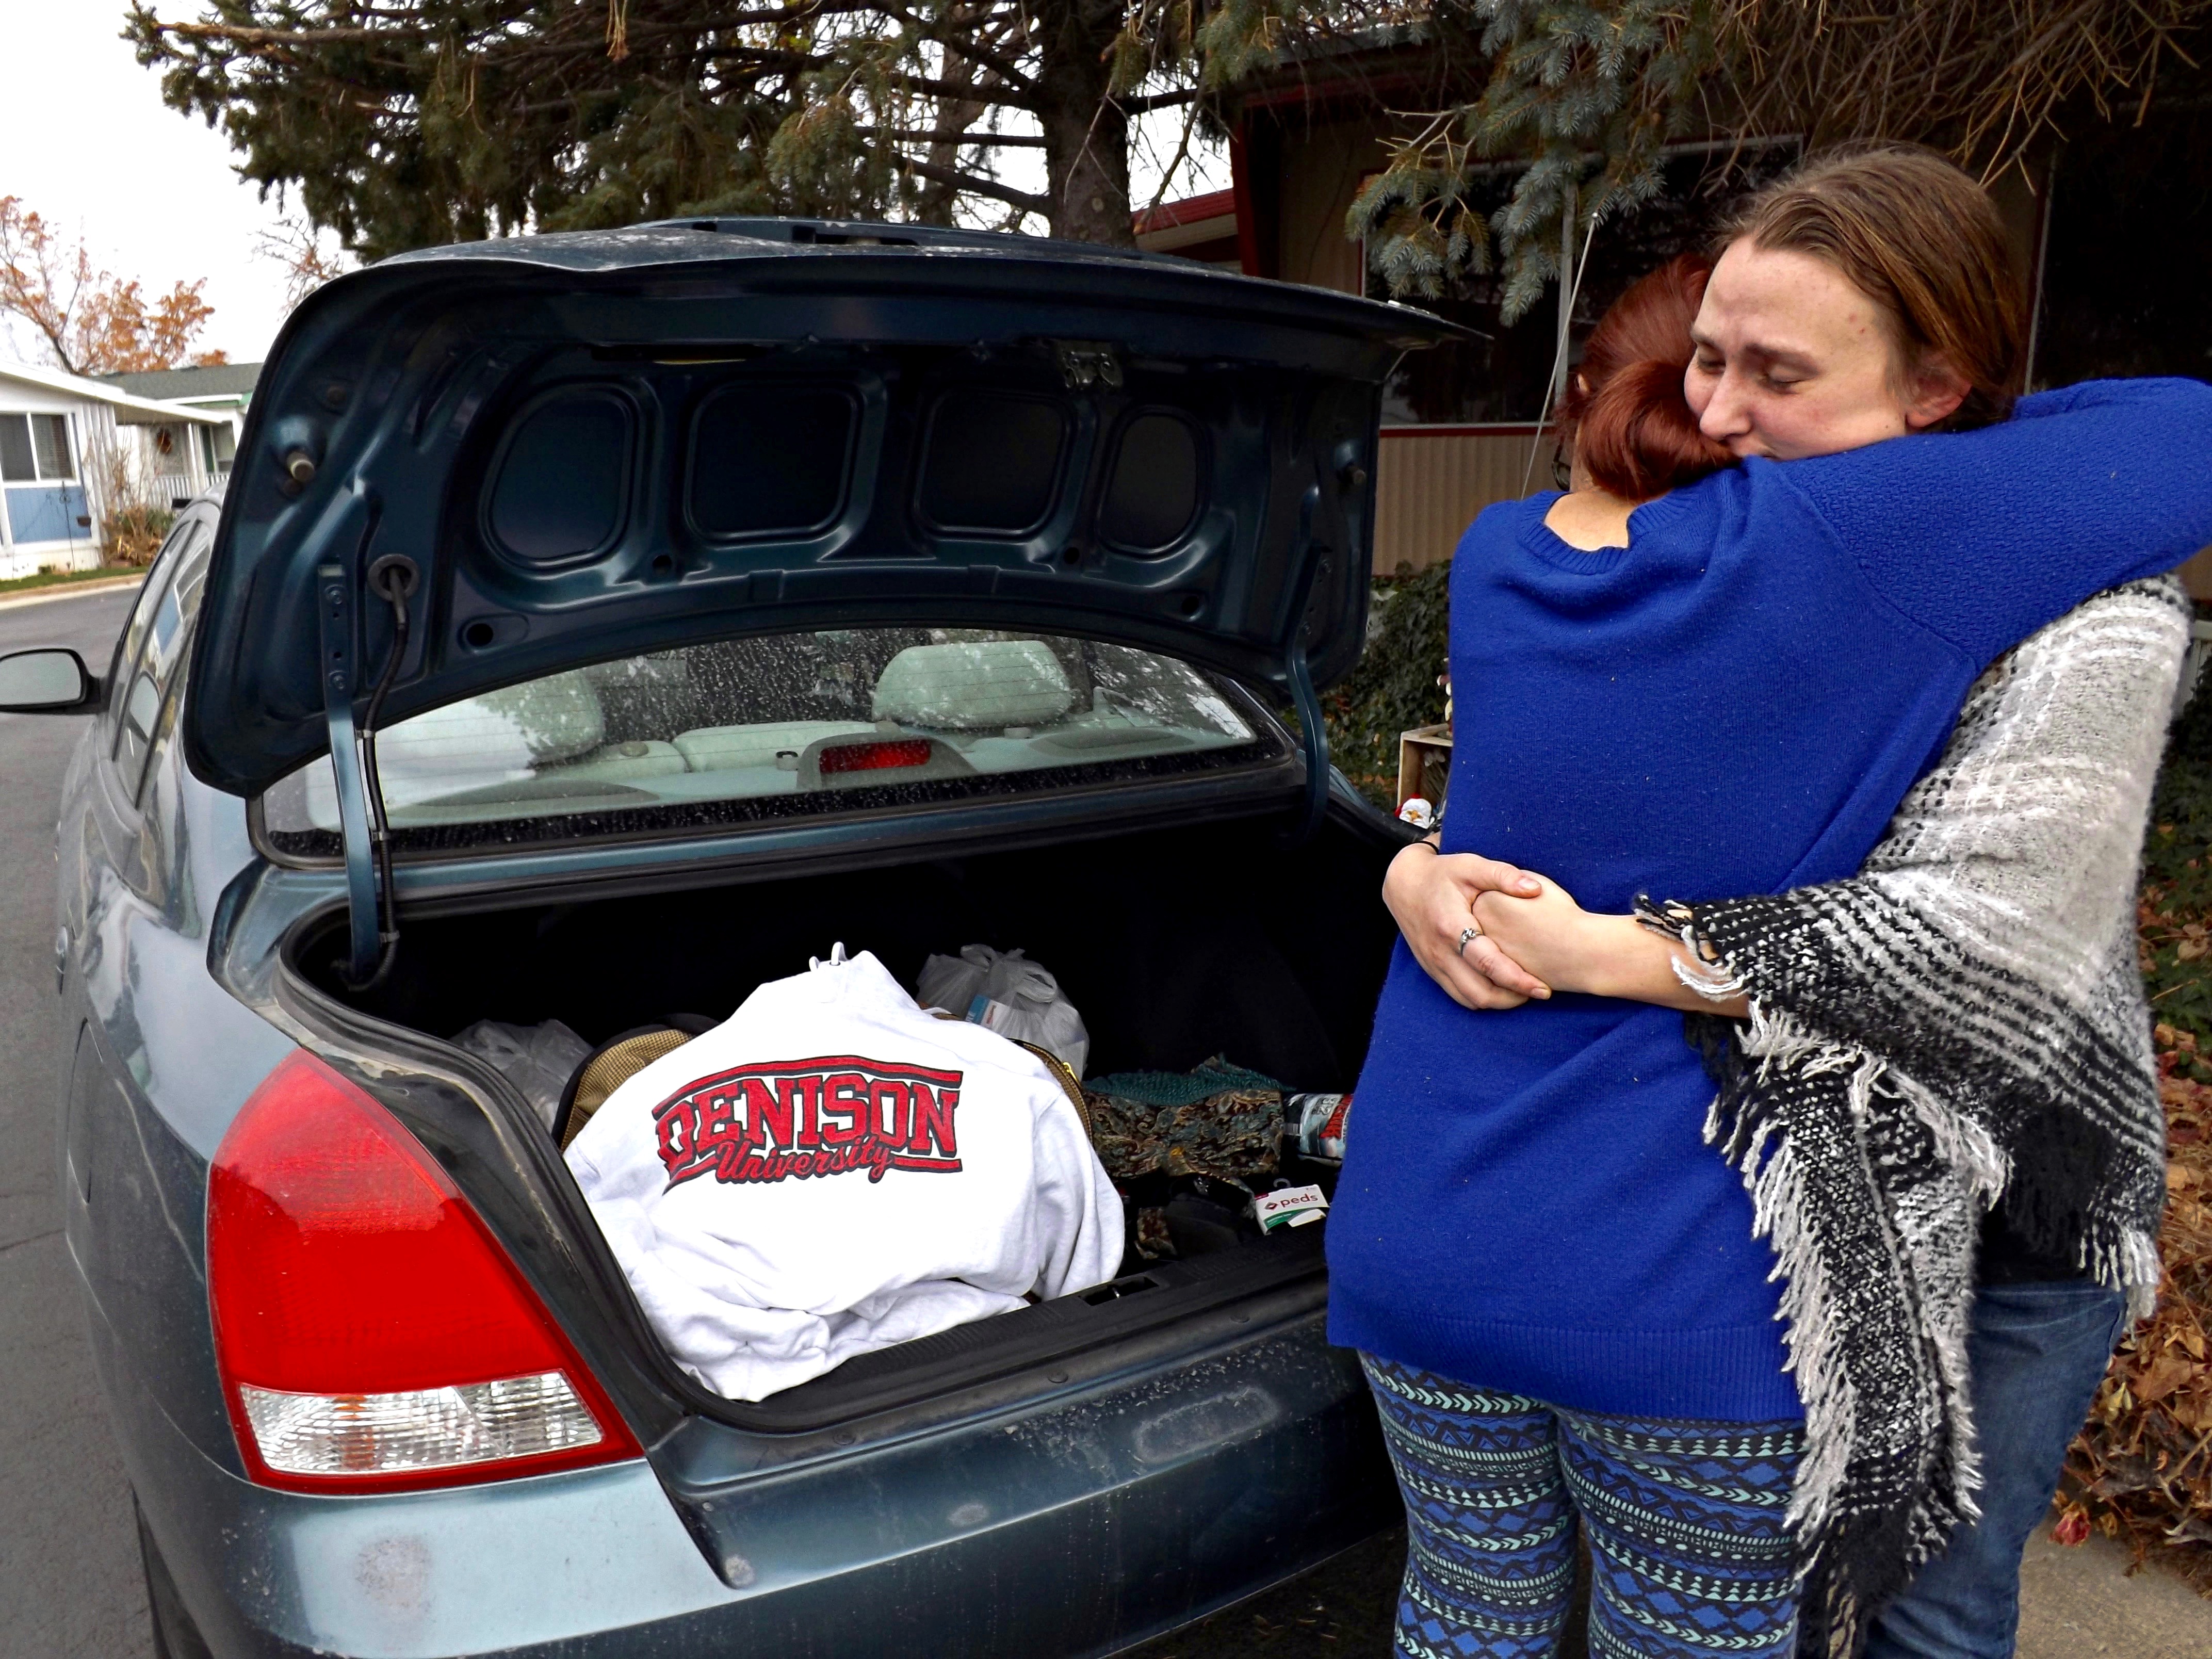 A student is hugging a parent in front of an open car trunk showing a university sweater and moving boxes.